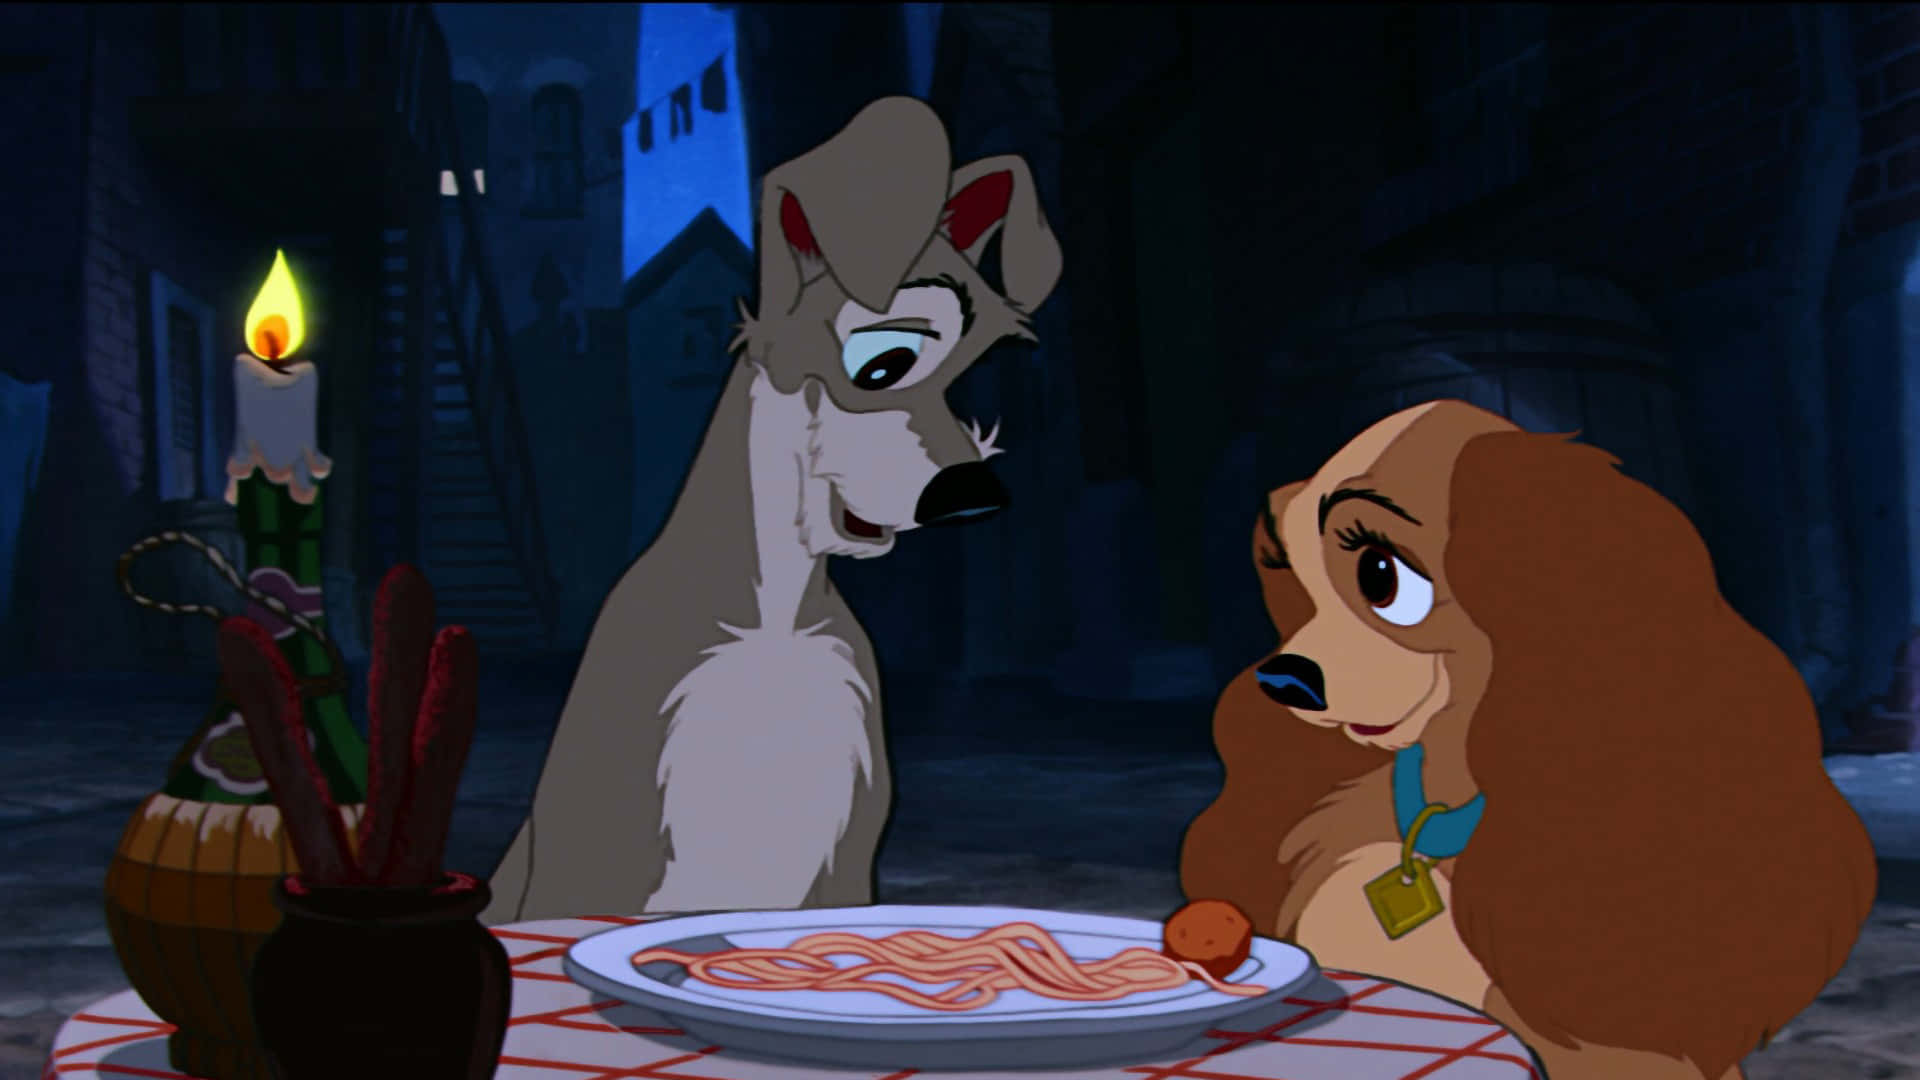 Romantic Spaghetti Dinner - Lady and the Tramp Wallpaper